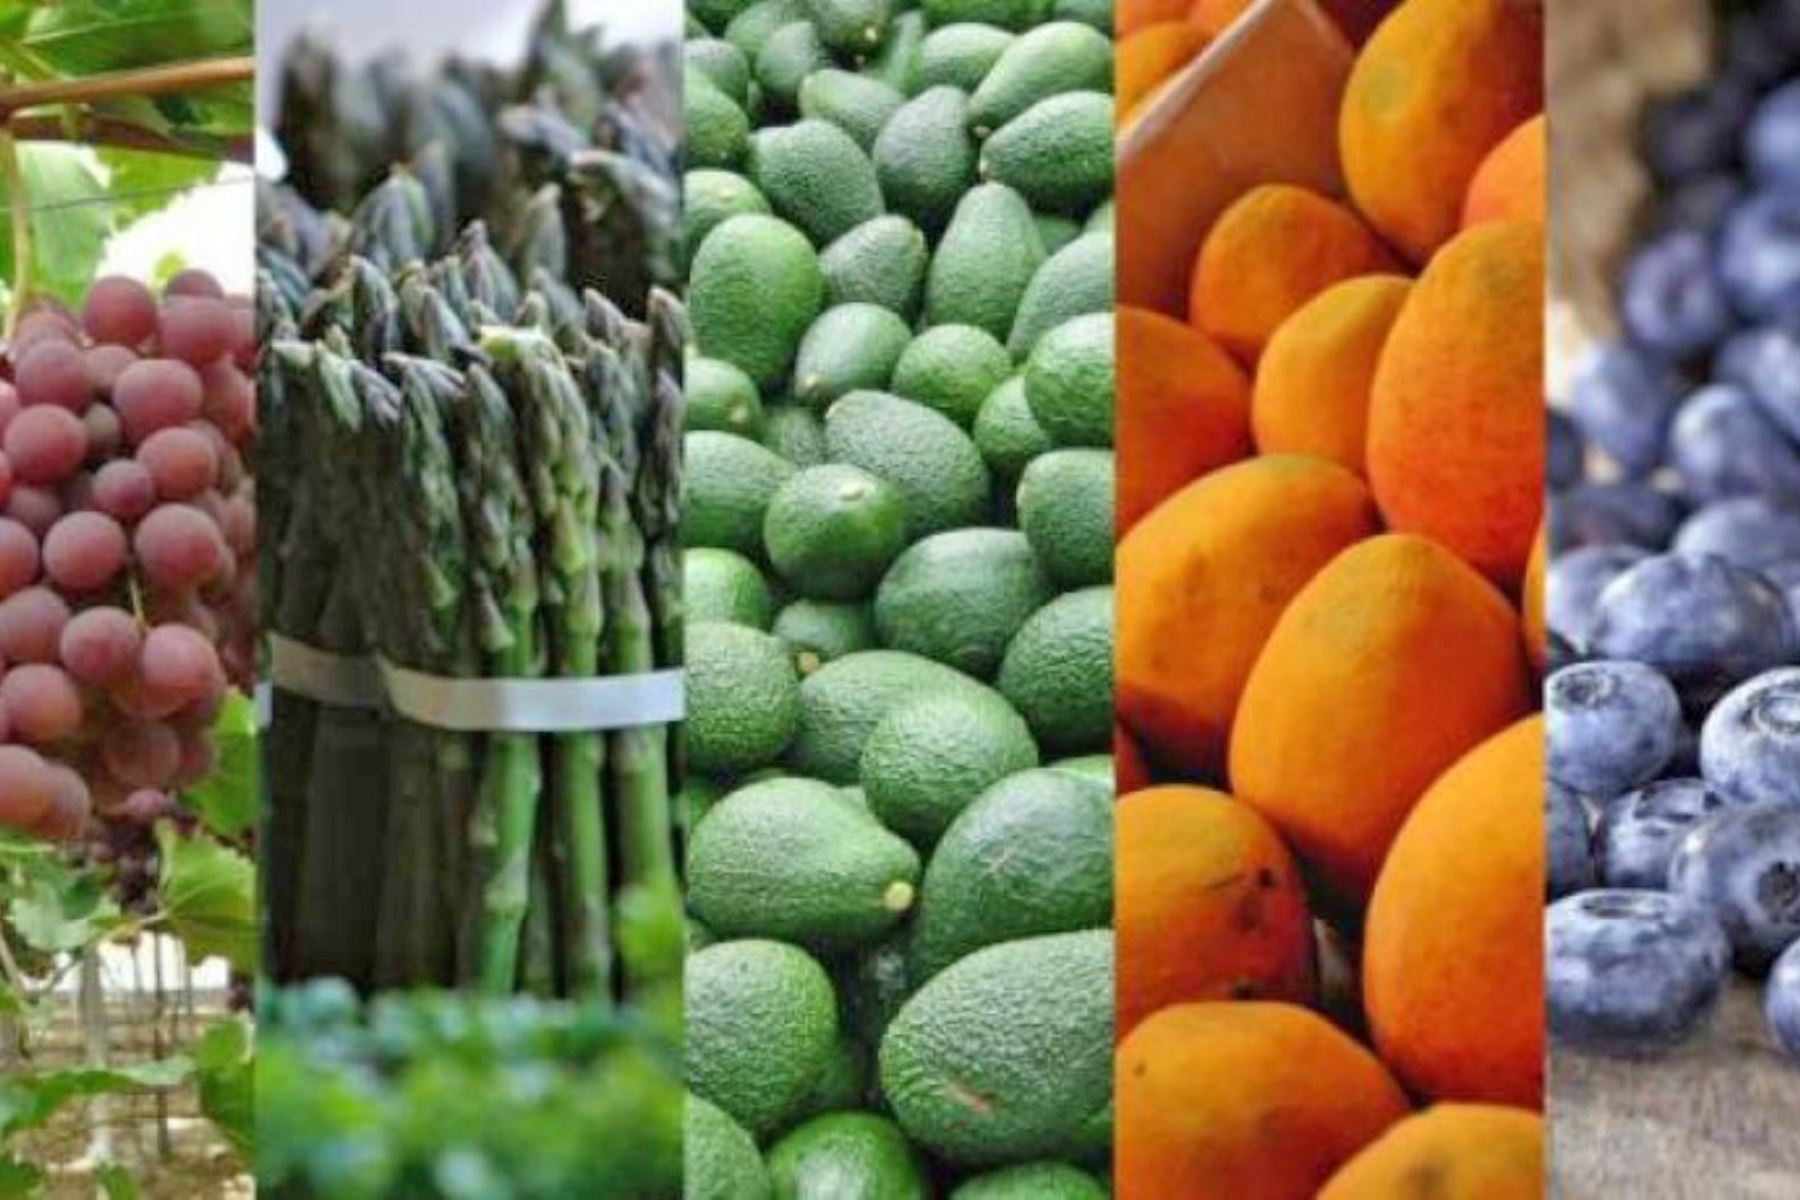 Peru: Agricultural exports expected to exceed US$11 billion in 2023